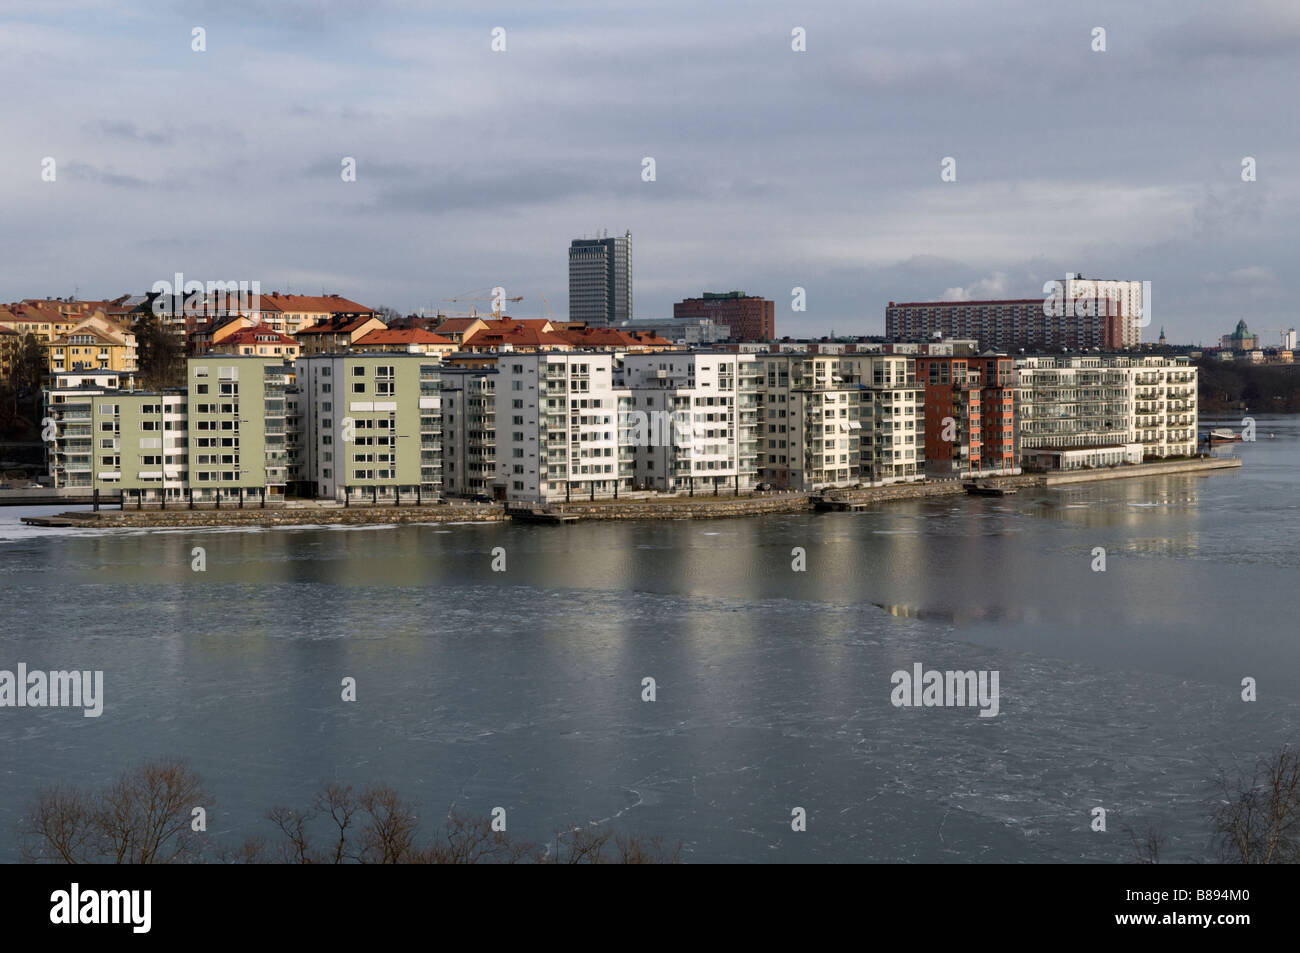 View from Essingeleden to Lilla Essingen. Stockholm. An newbuild housing area where Electrolux factory used to be. Stock Photo